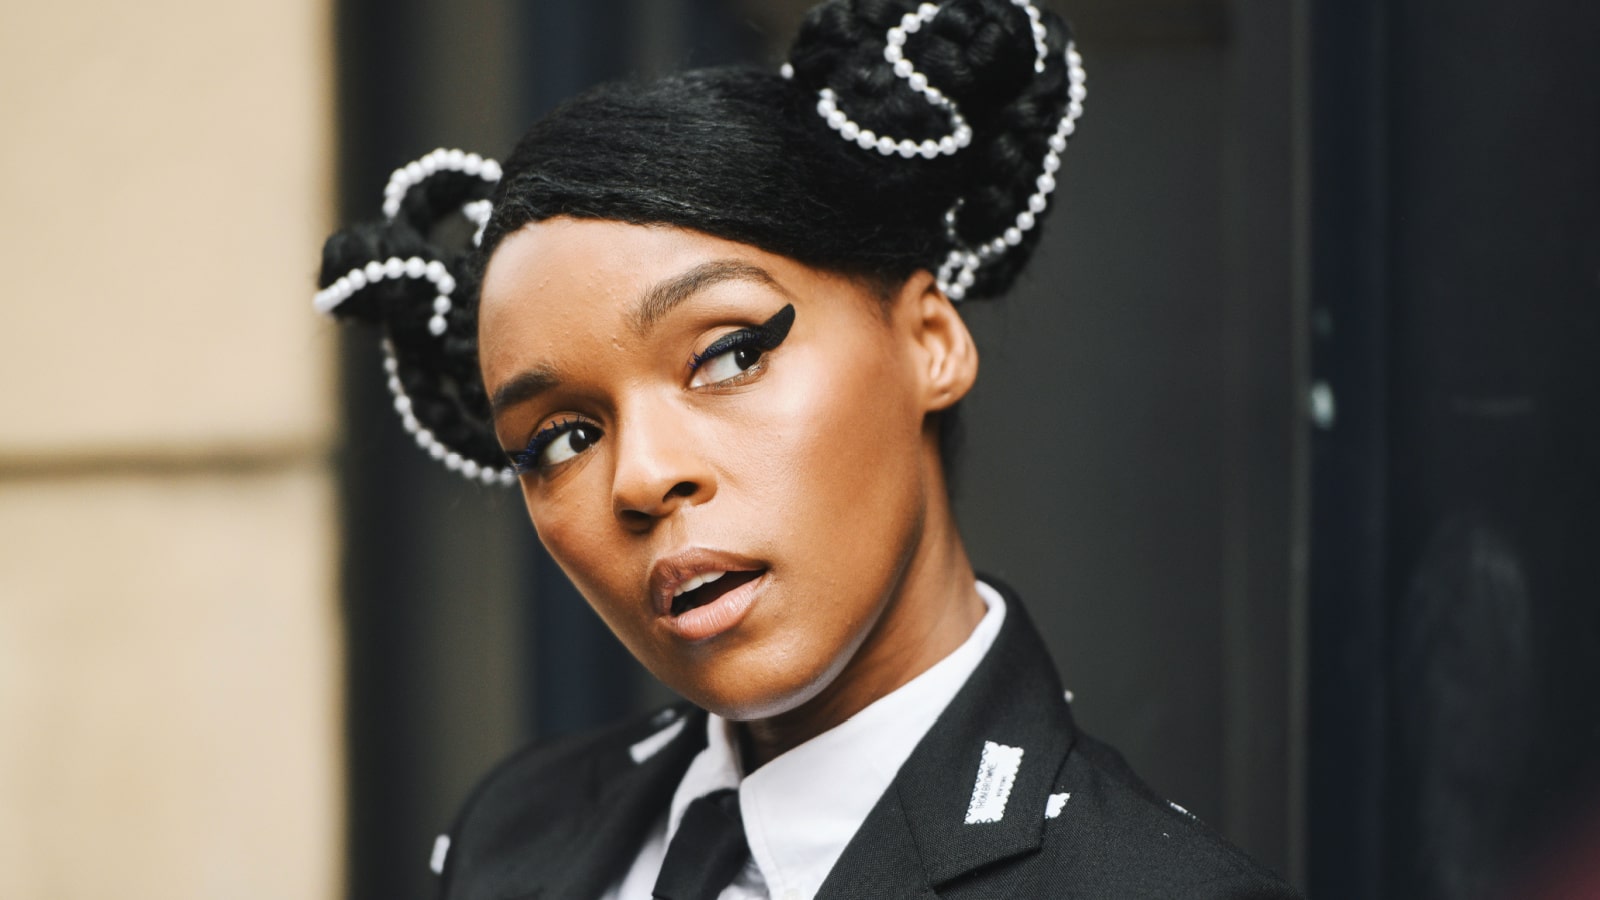 Paris, France - March 03, 2019: Street style outfit - Janelle Monae after a fashion show during Paris Fashion Week - PFWFW19